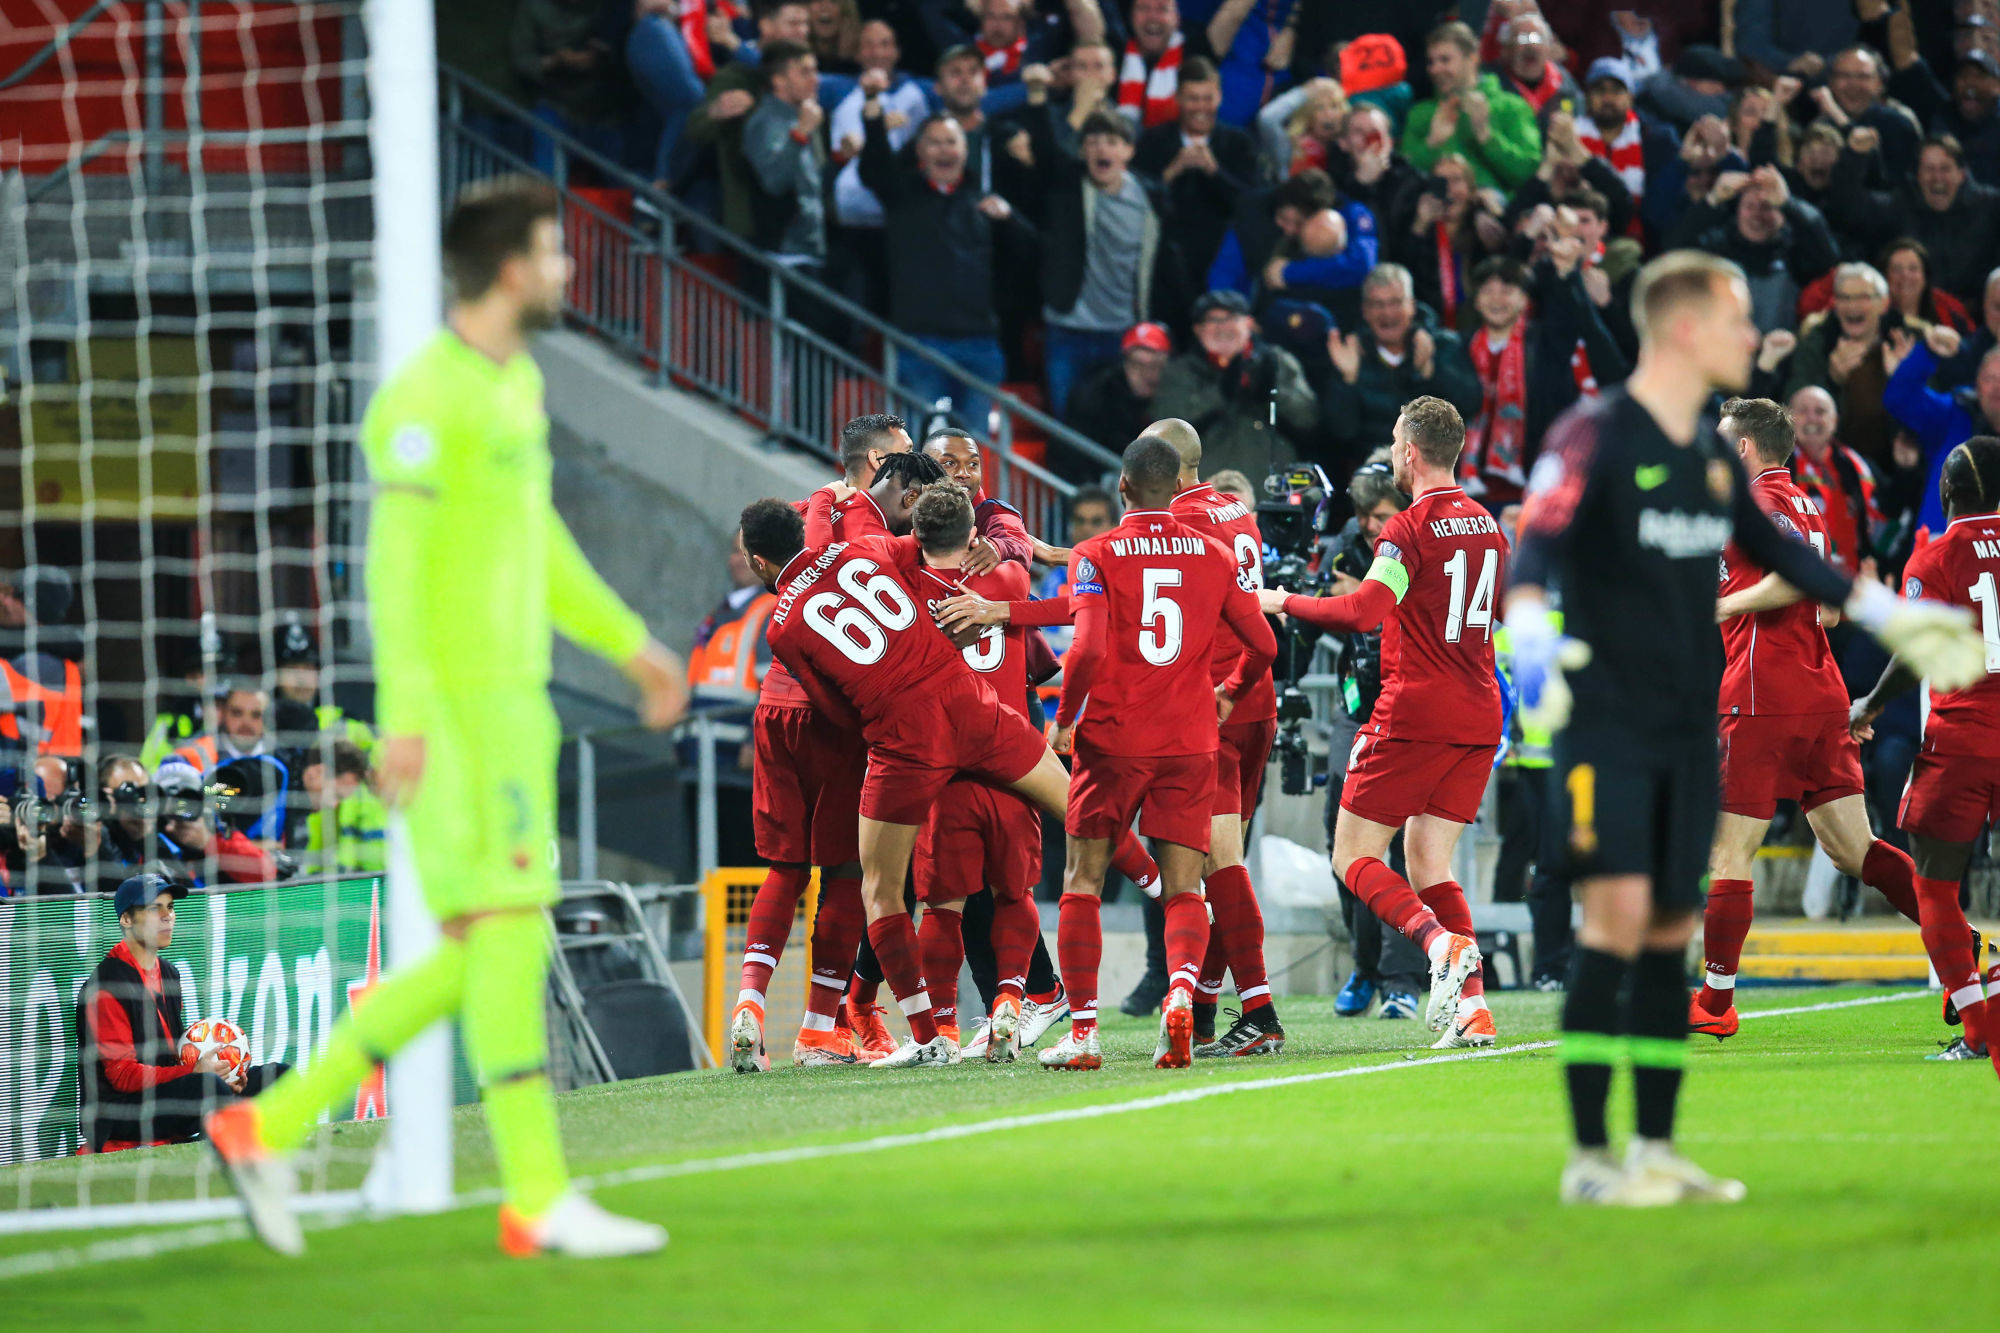 7th May 2019, Anfield, Liverpool, England; UEFA Champions League football, semi final second leg, Liverpool versus FC Barcelona; Divock Origi of Liverpool  celebrates with his team mates after scoring his side's fourth goal in the 79th minute from a quickly taken corner Photo : Actionplus / Icon Sport